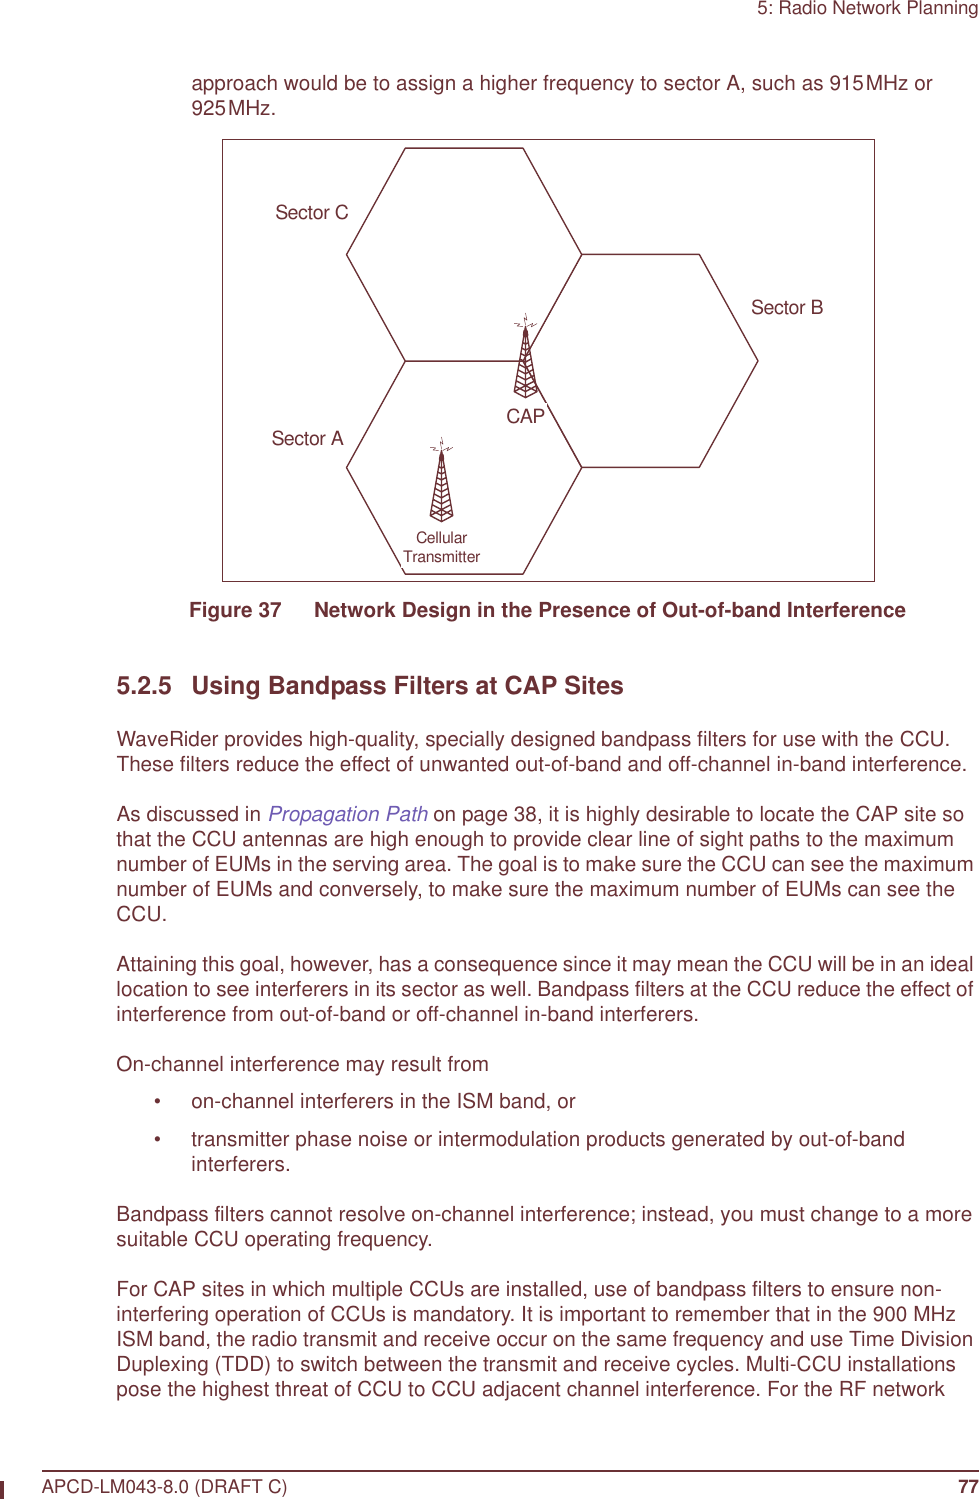 5: Radio Network PlanningAPCD-LM043-8.0 (DRAFT C) 77approach would be to assign a higher frequency to sector A, such as 915MHz or 925MHz.Figure 37   Network Design in the Presence of Out-of-band Interference5.2.5 Using Bandpass Filters at CAP SitesWaveRider provides high-quality, specially designed bandpass filters for use with the CCU. These filters reduce the effect of unwanted out-of-band and off-channel in-band interference.As discussed in Propagation Path on page 38, it is highly desirable to locate the CAP site so that the CCU antennas are high enough to provide clear line of sight paths to the maximum number of EUMs in the serving area. The goal is to make sure the CCU can see the maximum number of EUMs and conversely, to make sure the maximum number of EUMs can see the CCU.Attaining this goal, however, has a consequence since it may mean the CCU will be in an ideal location to see interferers in its sector as well. Bandpass filters at the CCU reduce the effect of interference from out-of-band or off-channel in-band interferers. On-channel interference may result from • on-channel interferers in the ISM band, or• transmitter phase noise or intermodulation products generated by out-of-band interferers.Bandpass filters cannot resolve on-channel interference; instead, you must change to a more suitable CCU operating frequency.For CAP sites in which multiple CCUs are installed, use of bandpass filters to ensure non-interfering operation of CCUs is mandatory. It is important to remember that in the 900 MHz ISM band, the radio transmit and receive occur on the same frequency and use Time Division Duplexing (TDD) to switch between the transmit and receive cycles. Multi-CCU installations pose the highest threat of CCU to CCU adjacent channel interference. For the RF network Sector CSector ASector BCellularTransmitterCAP